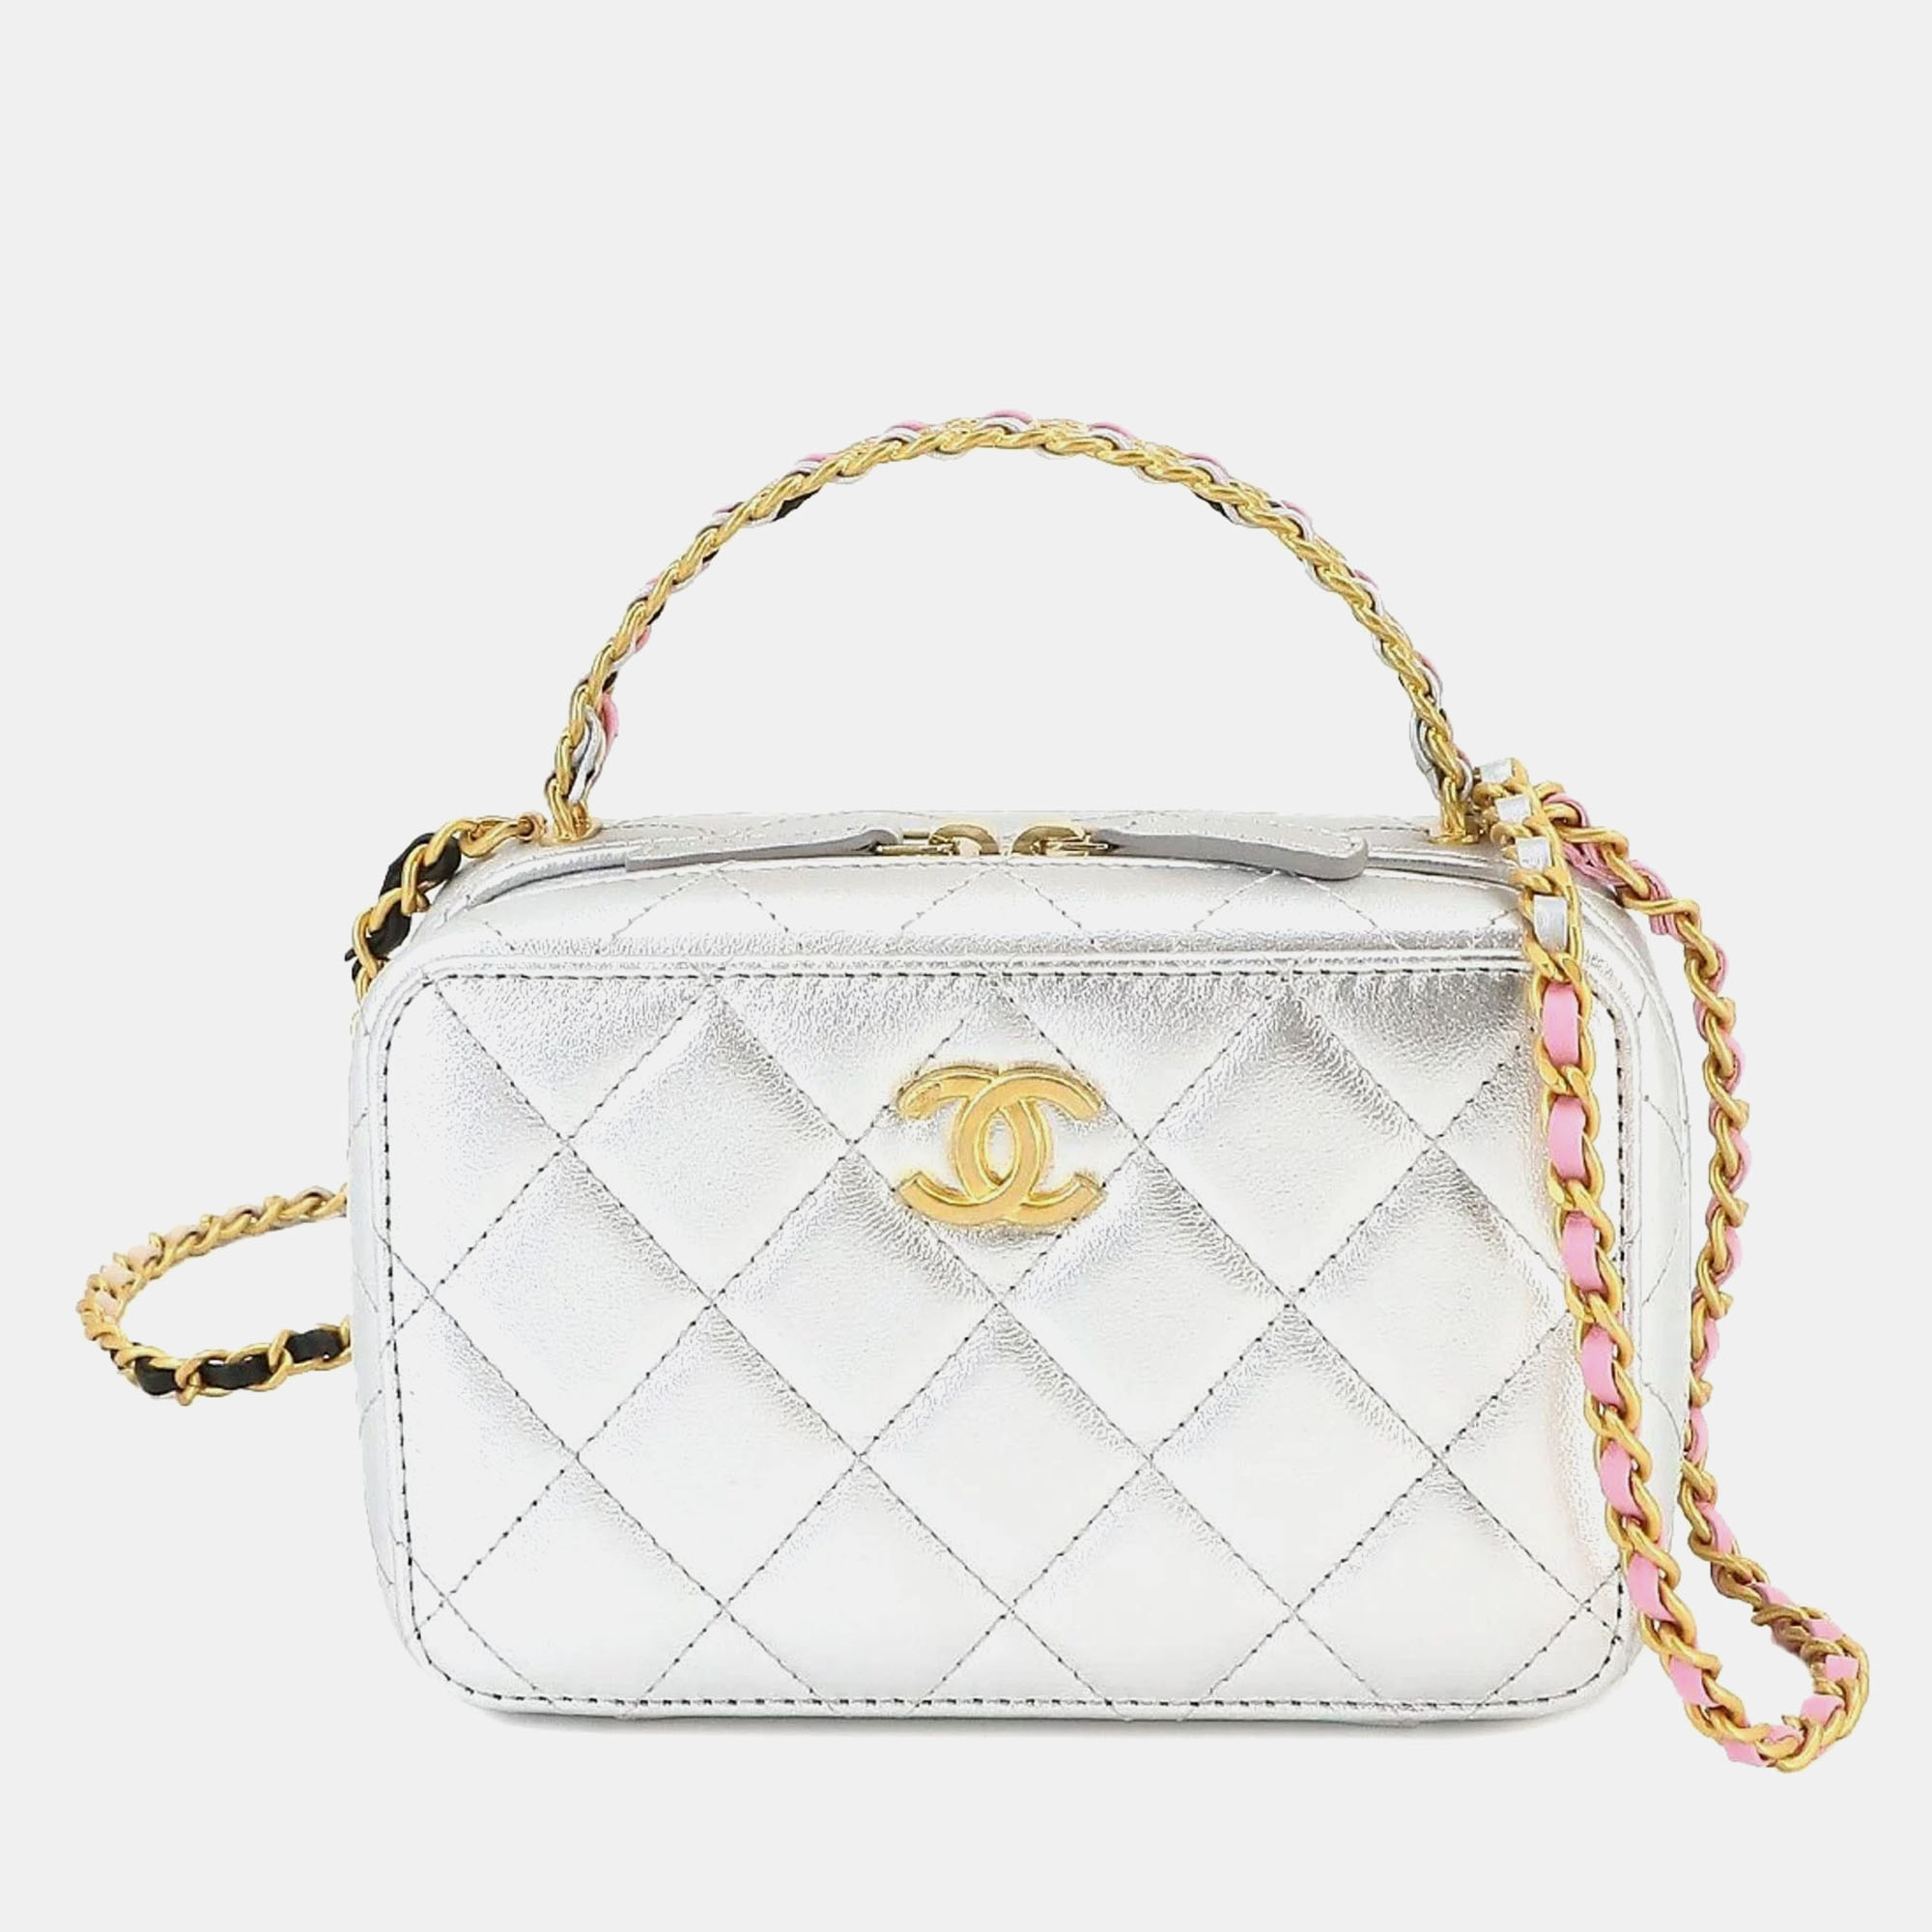 Chanel silver quilted lambskin top handle vanity case